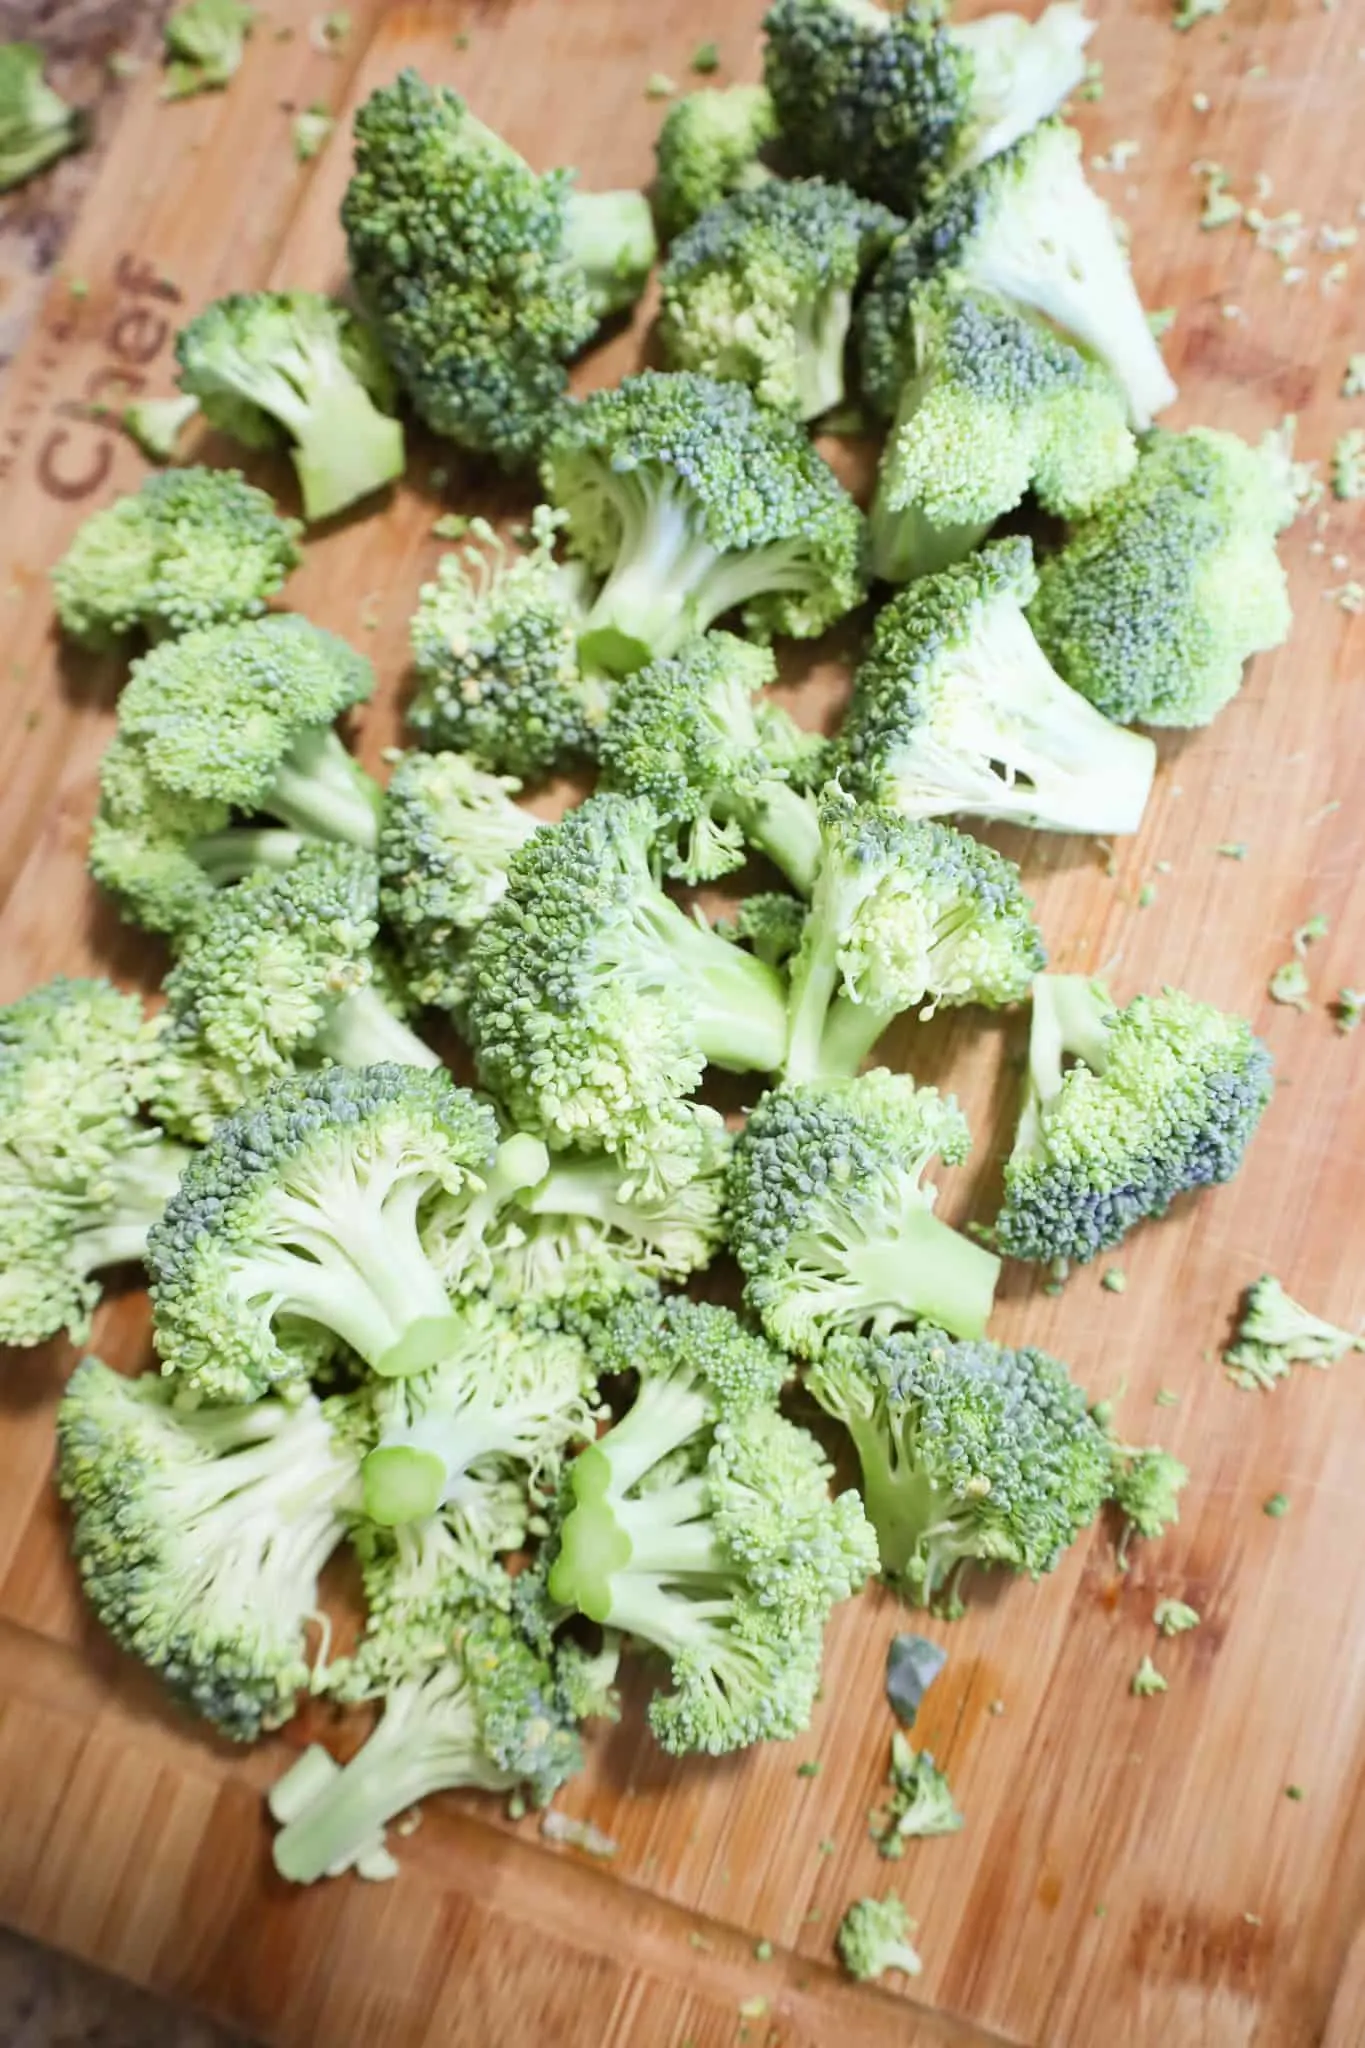 uncooked broccoli florets on a cutting board